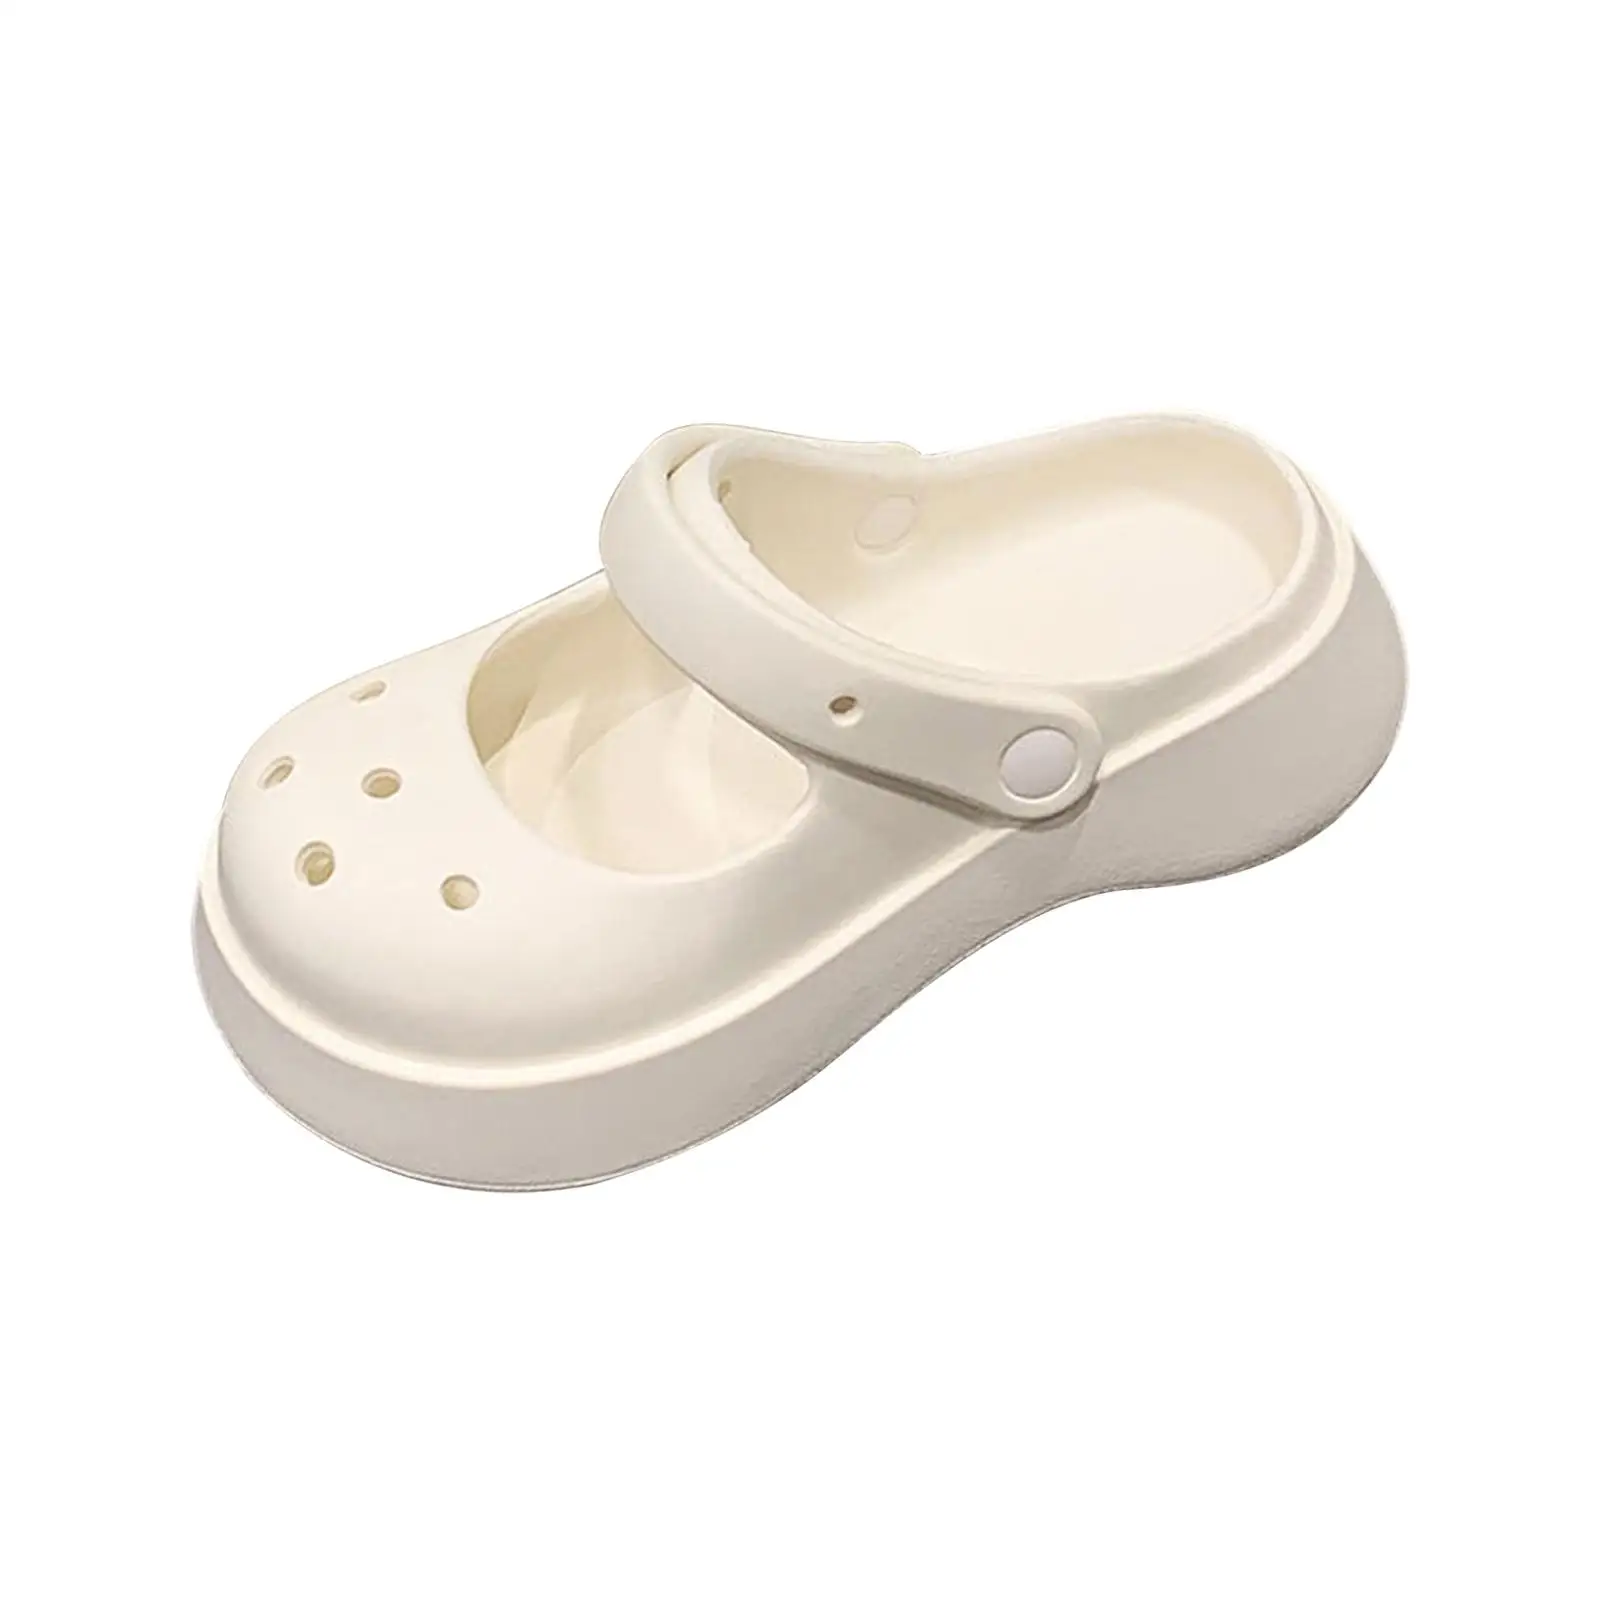 Slipper Shoes Closed Toe Sandals Waterproof Non Slip Thick Sole Slippers for Women Female Couples Outdoor Bathroom